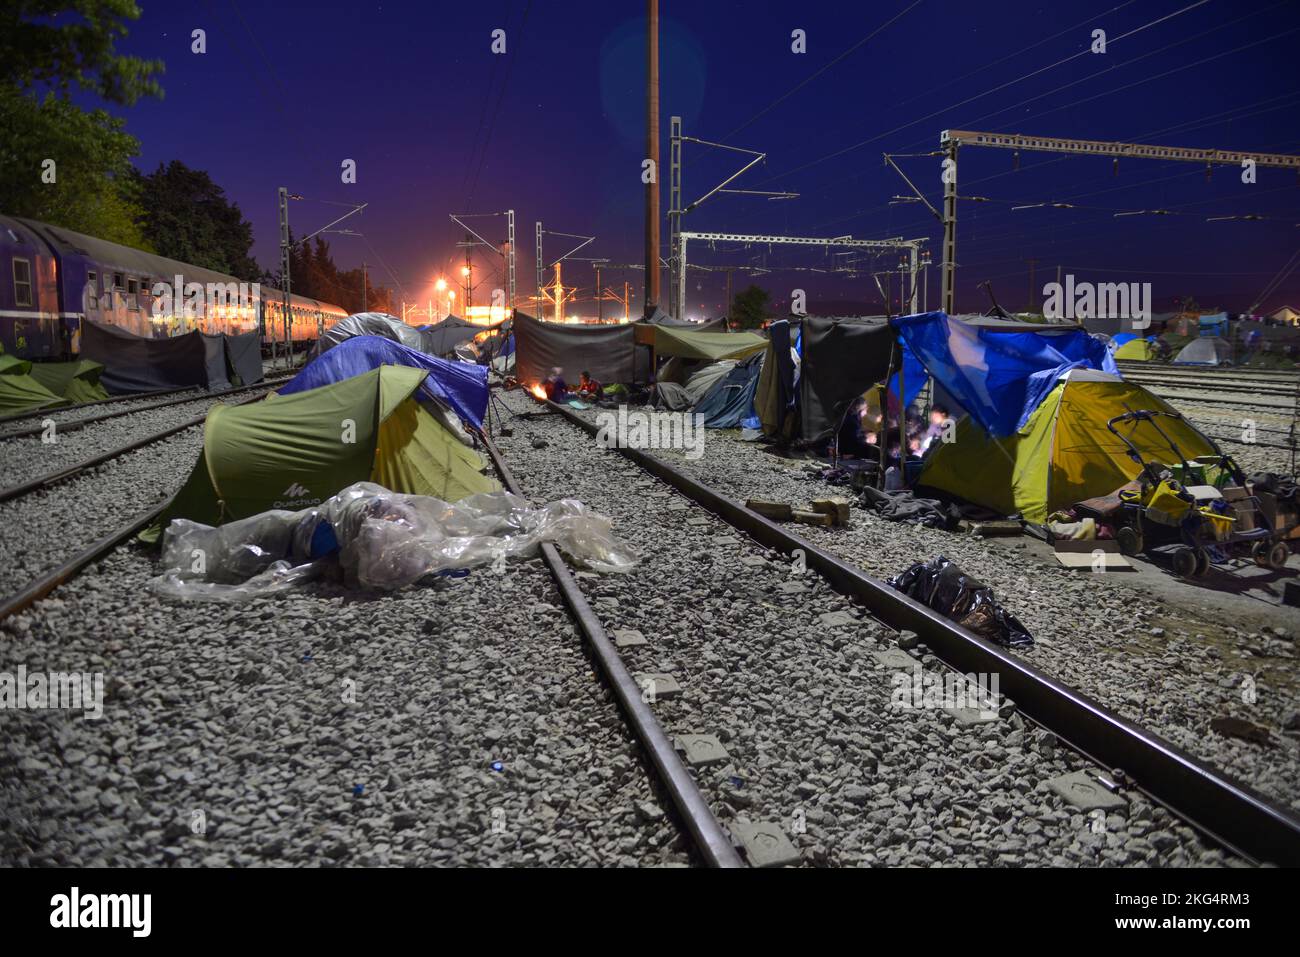 Long exposure of improvised tent city on railway tracks at night. Transit refugee/migrant camp at the Greek-North Macedonian border. Stock Photo